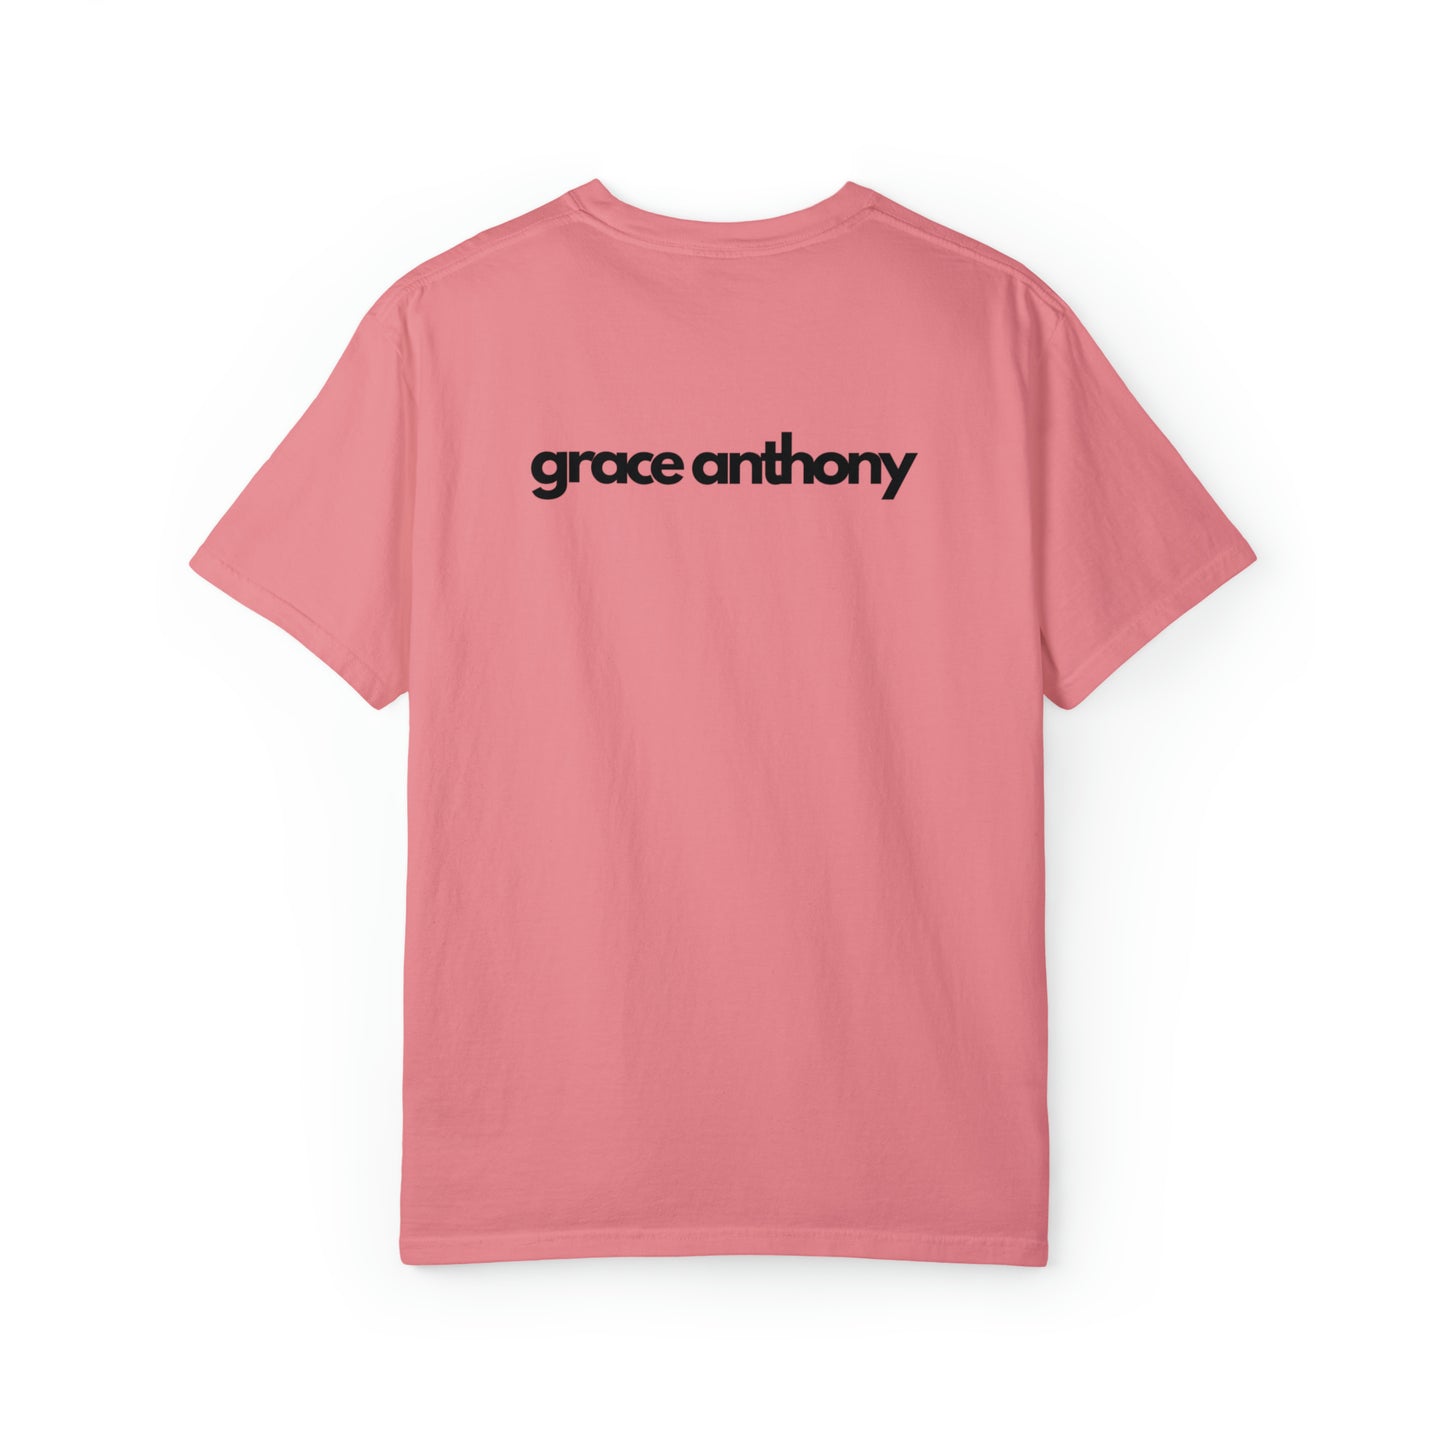 Grace Anthony Logo Shirt, Brand Name T-Shirt, Gift for Mother Father Daughter Son Child Grandparent Teacher Nurse, Journals Note Keeping